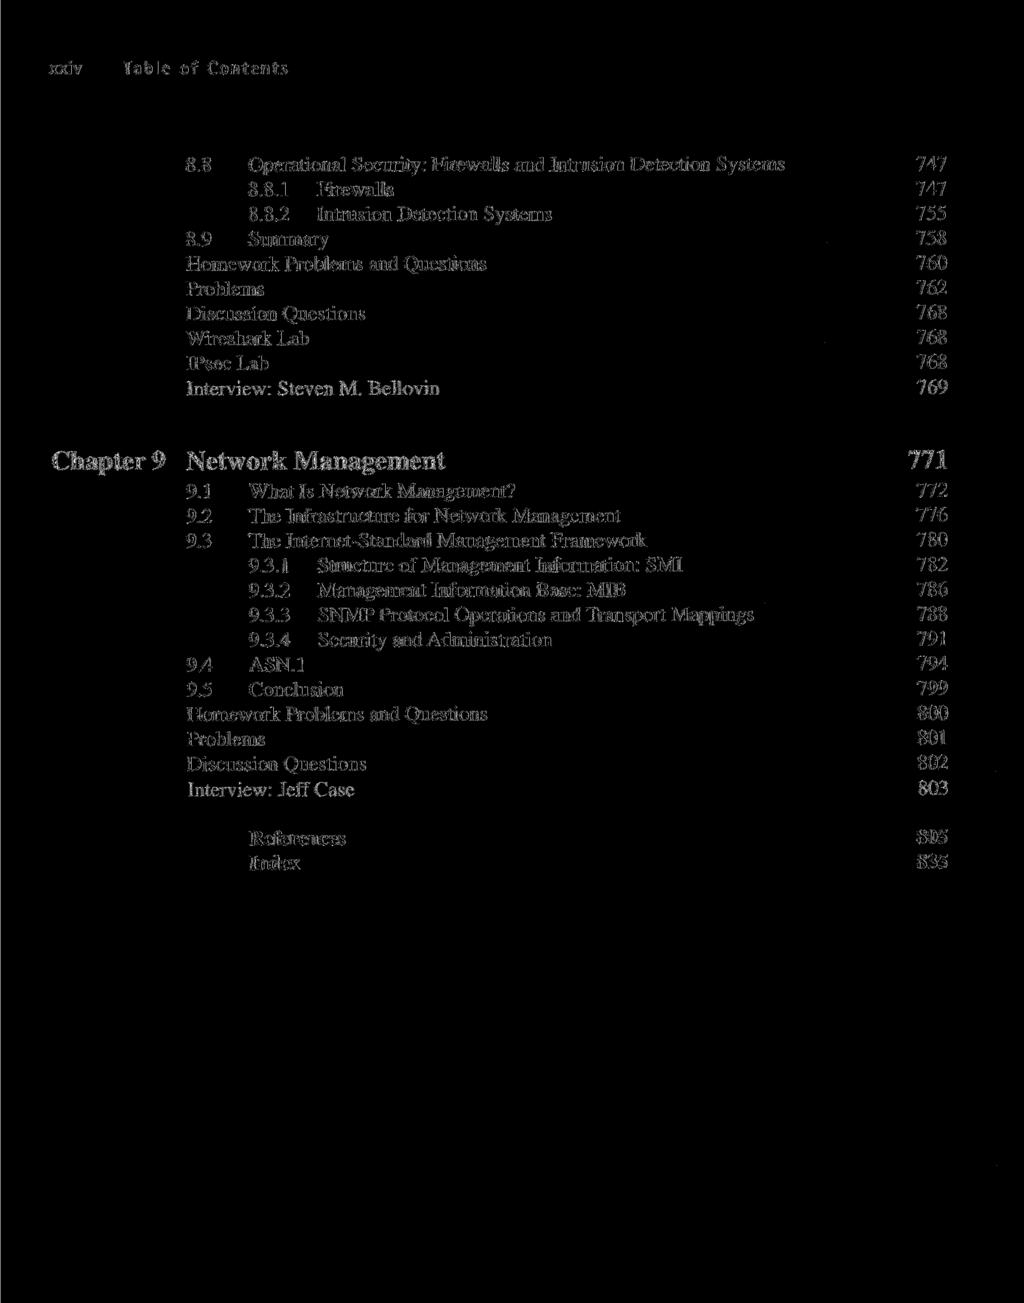 xxiv Table of Contents 8.8 Operational Security: Firewalls and Intrusion Detection Systems 747 8.8.1 Firewalls 747 8.8.2 Intrusion Detection Systems 755 8.